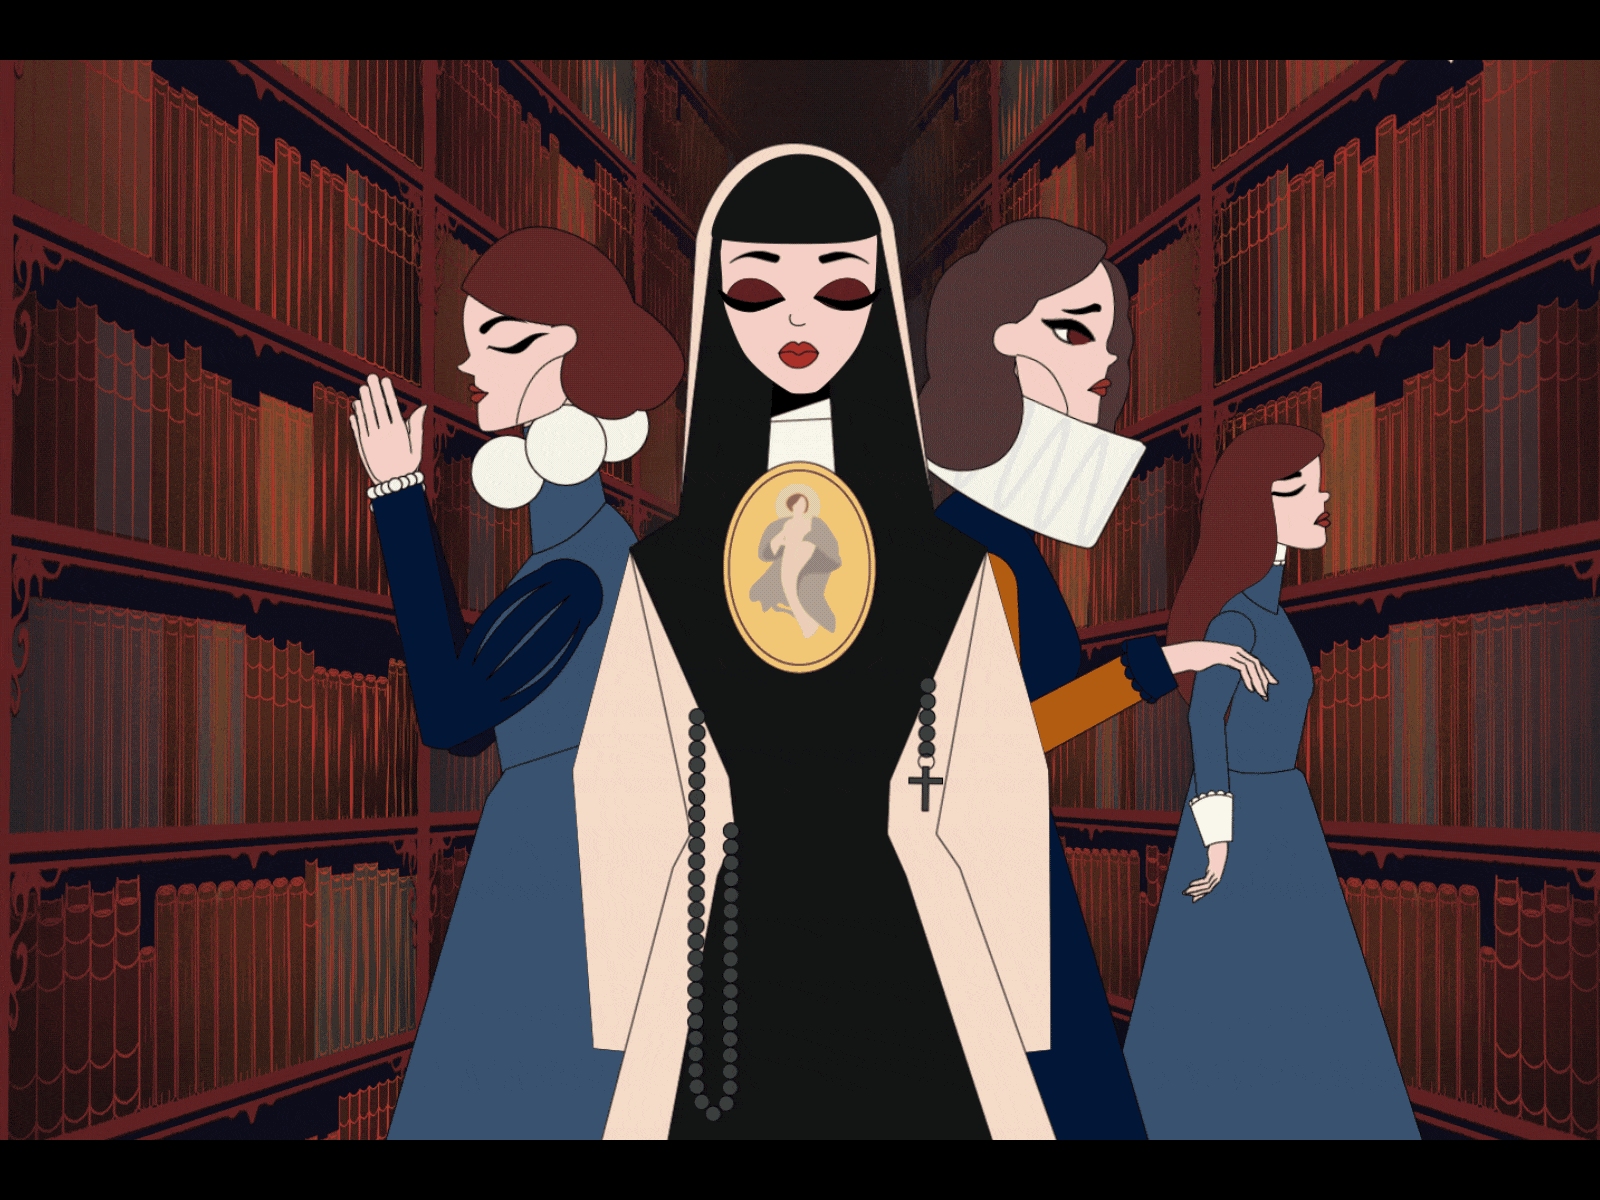 TED-Ed | History's "worst" nun 2d explainer video 2danimation aftereffects characterdesign characterdevelopment education video motion design motiongraphics ted education teded